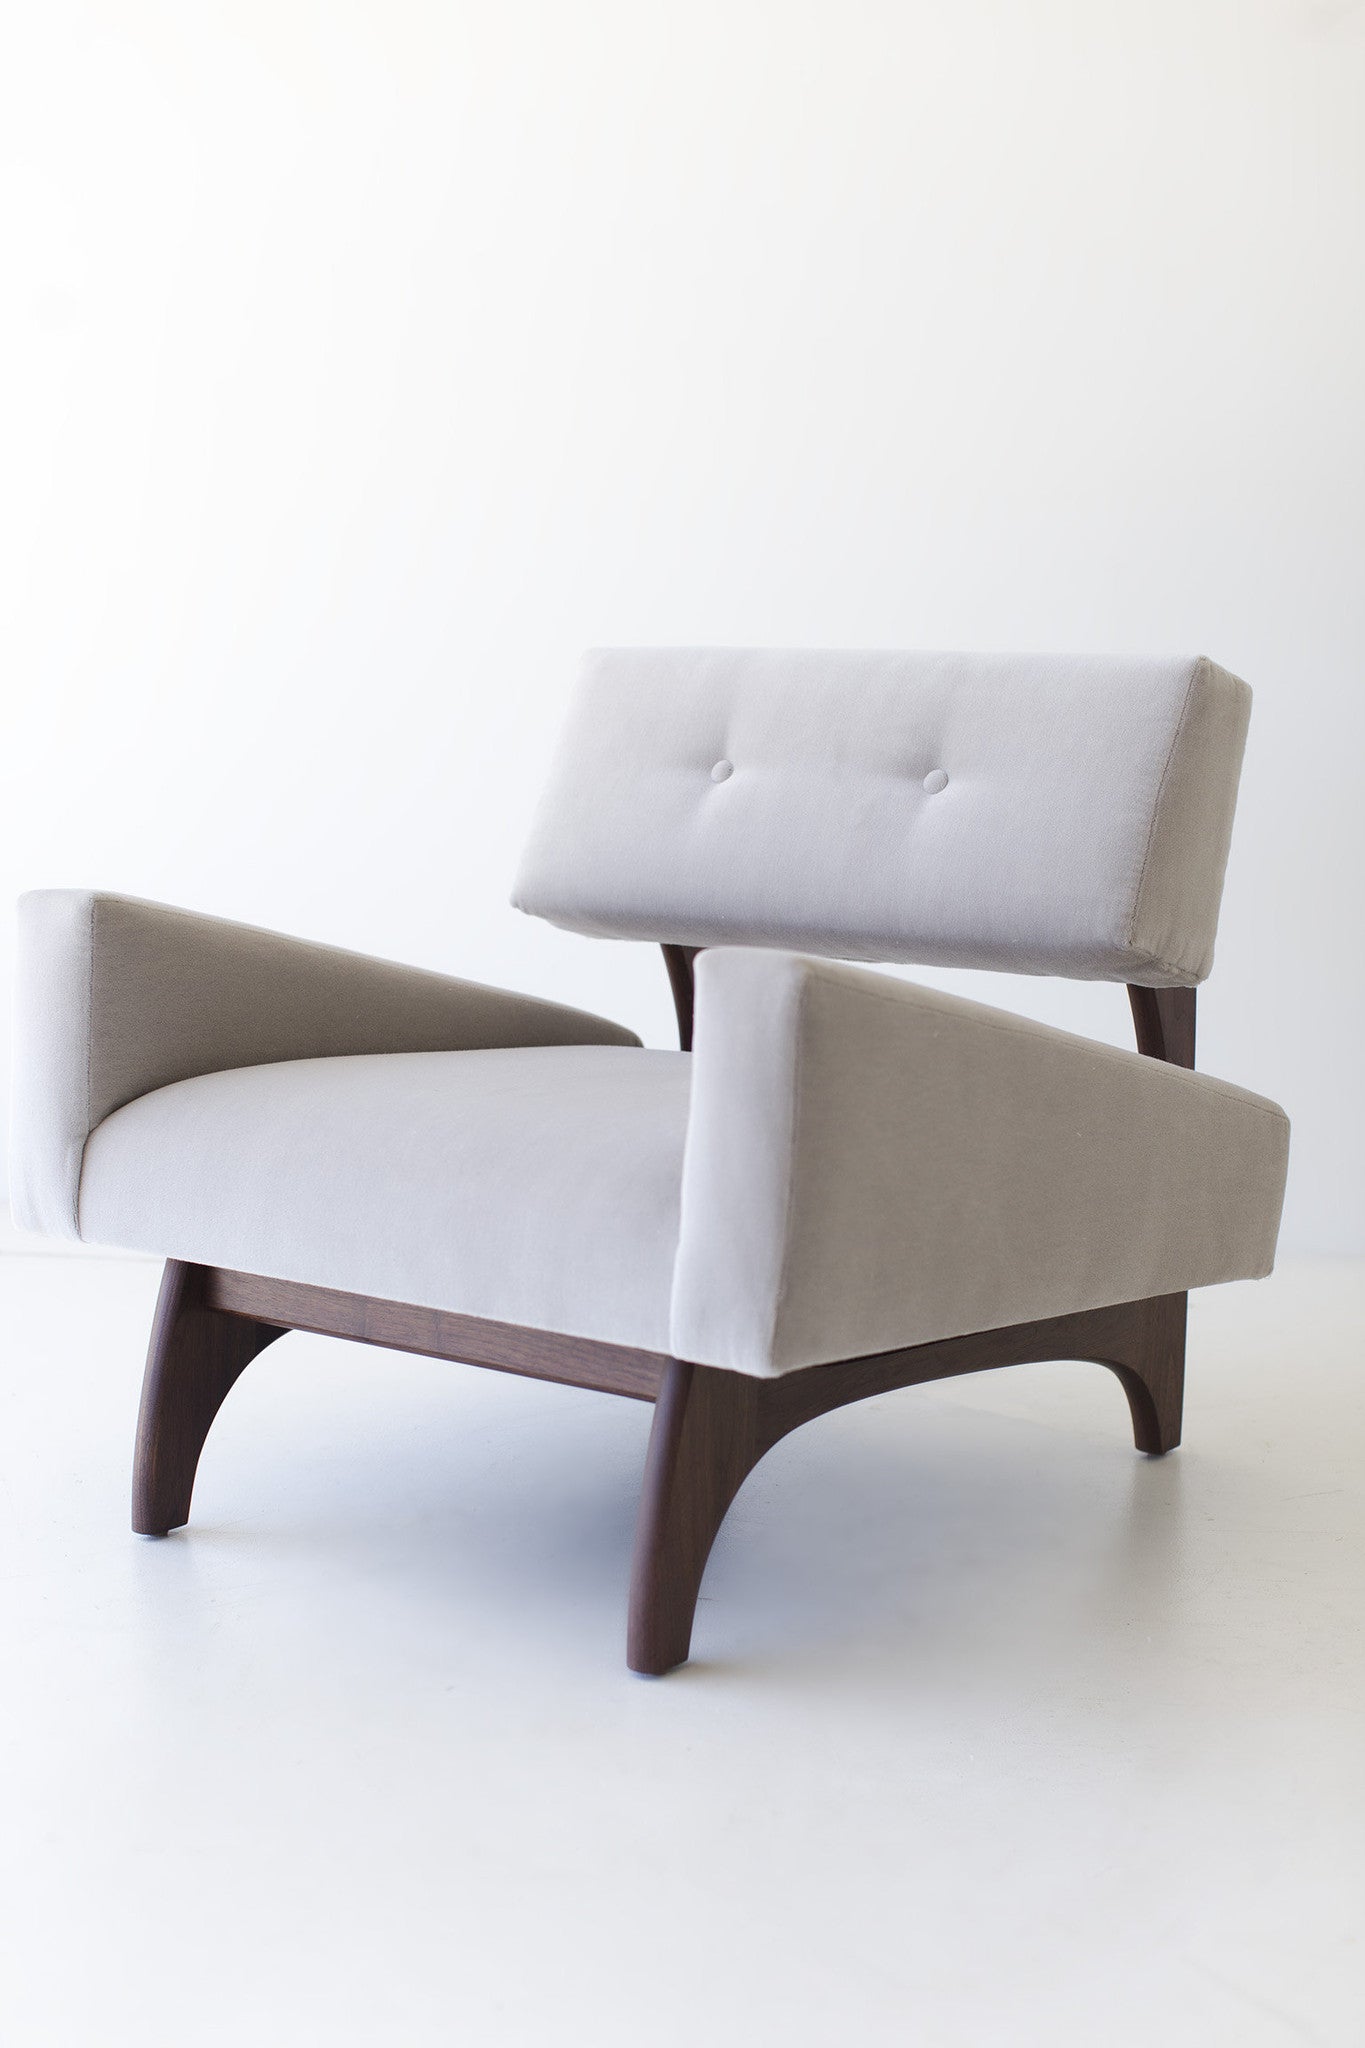 Craft Associates® Modern Lounge Chairs - 1519 - The Canadian